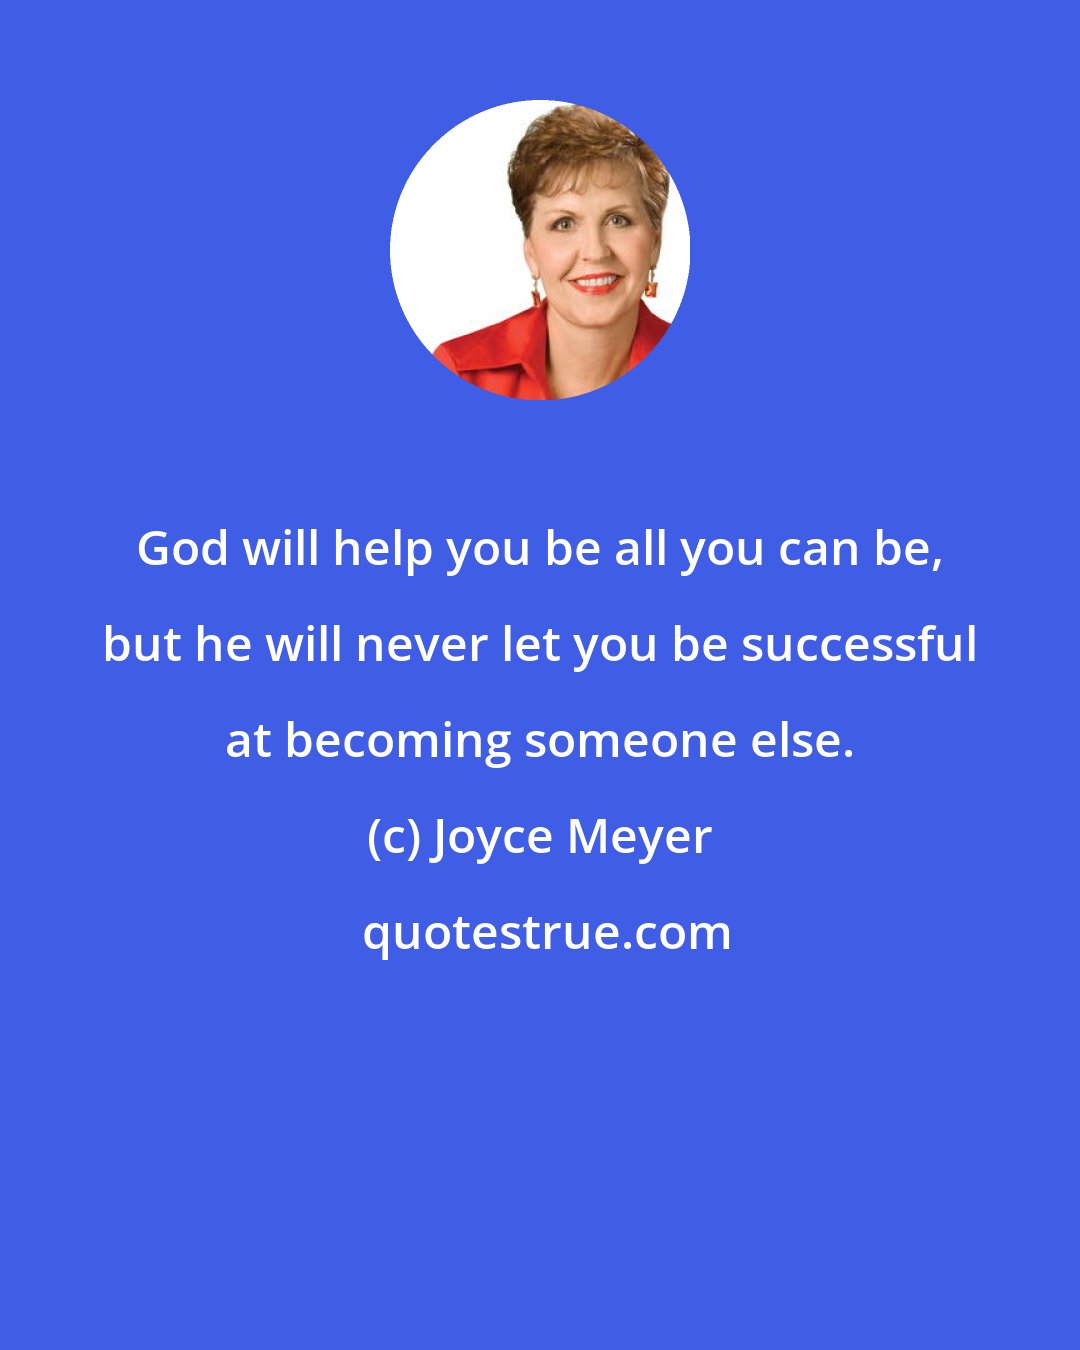 Joyce Meyer: God will help you be all you can be, but he will never let you be successful at becoming someone else.